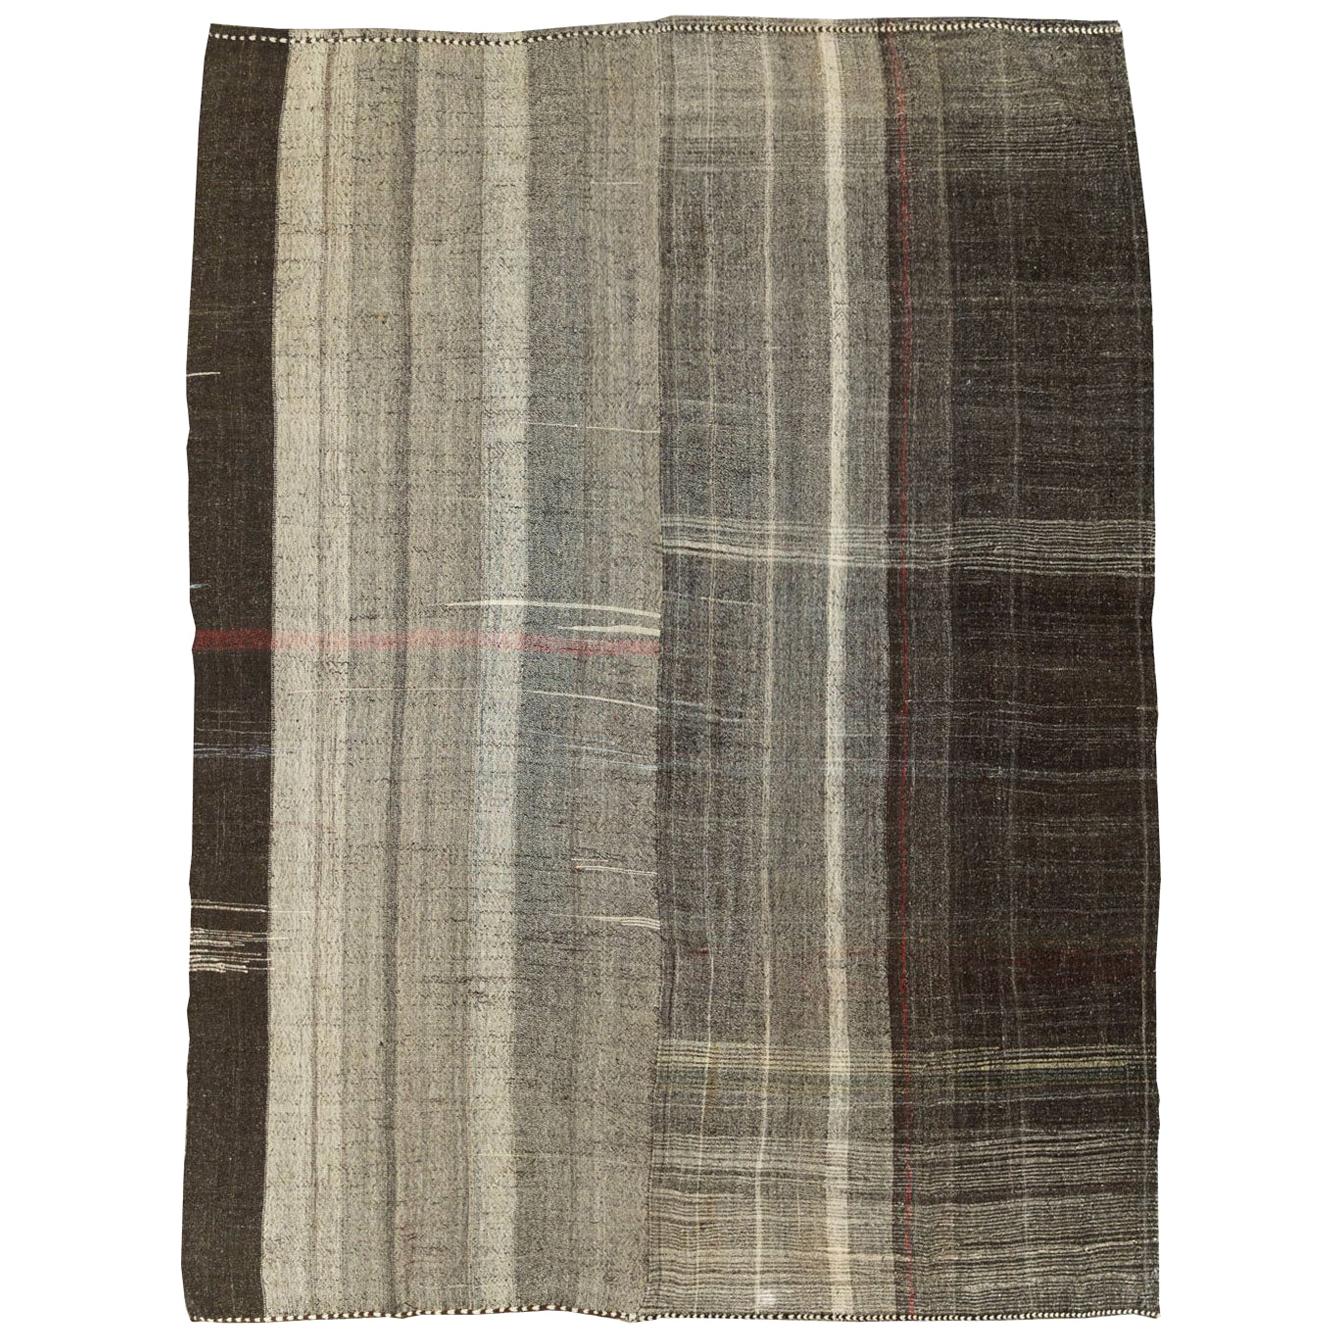 Mid-20th Century Turkish Tribal Kilim Room Size Carpet in Charcoal and Brown For Sale